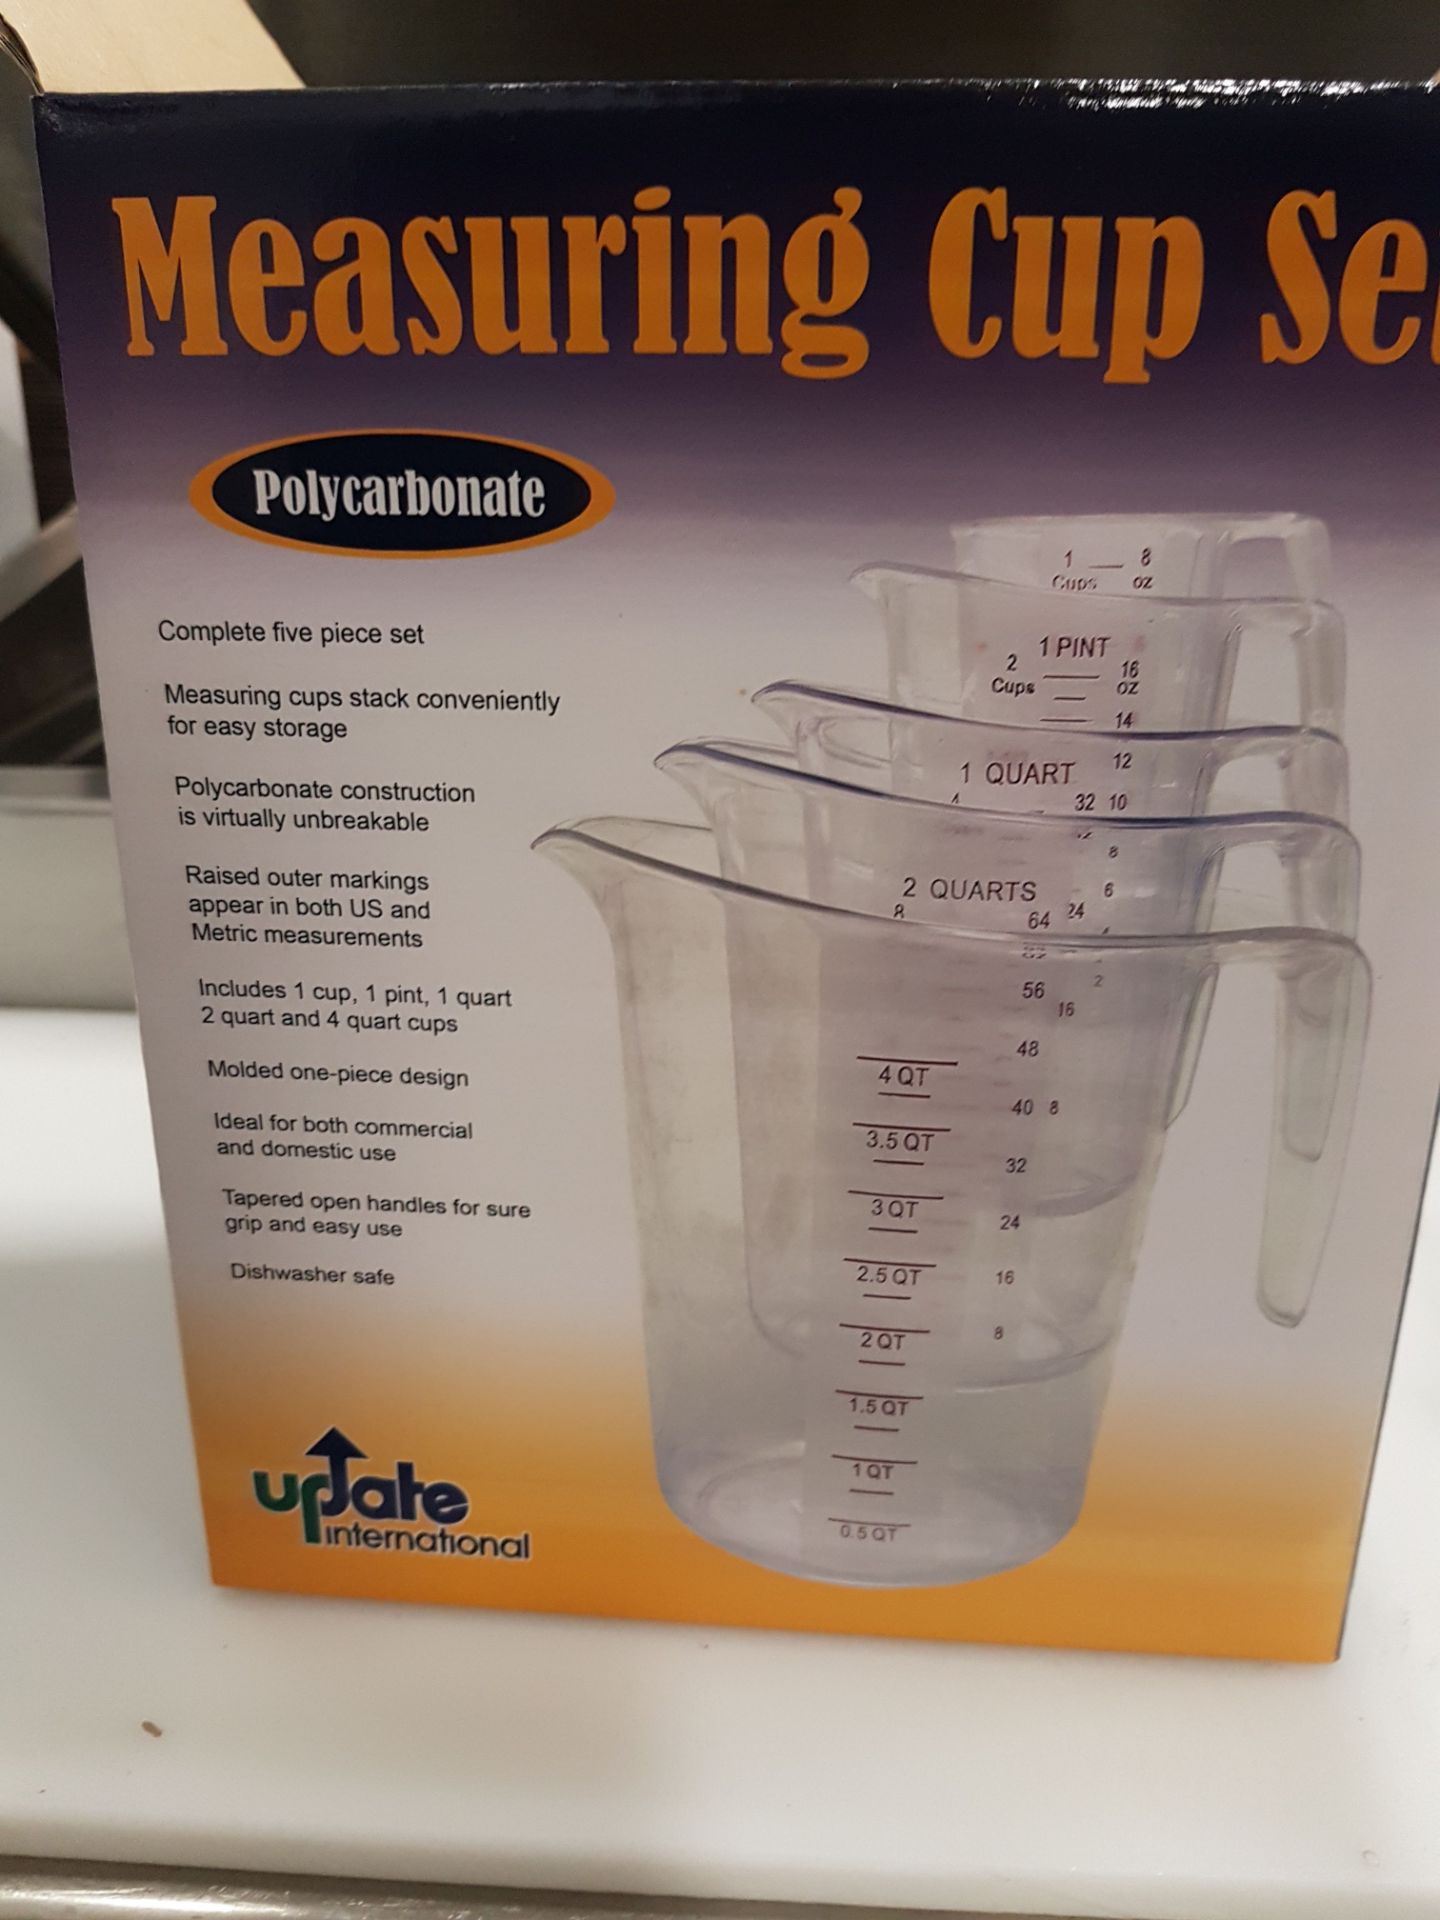 Measuring Cup Set - Polycarbonate - Image 2 of 3